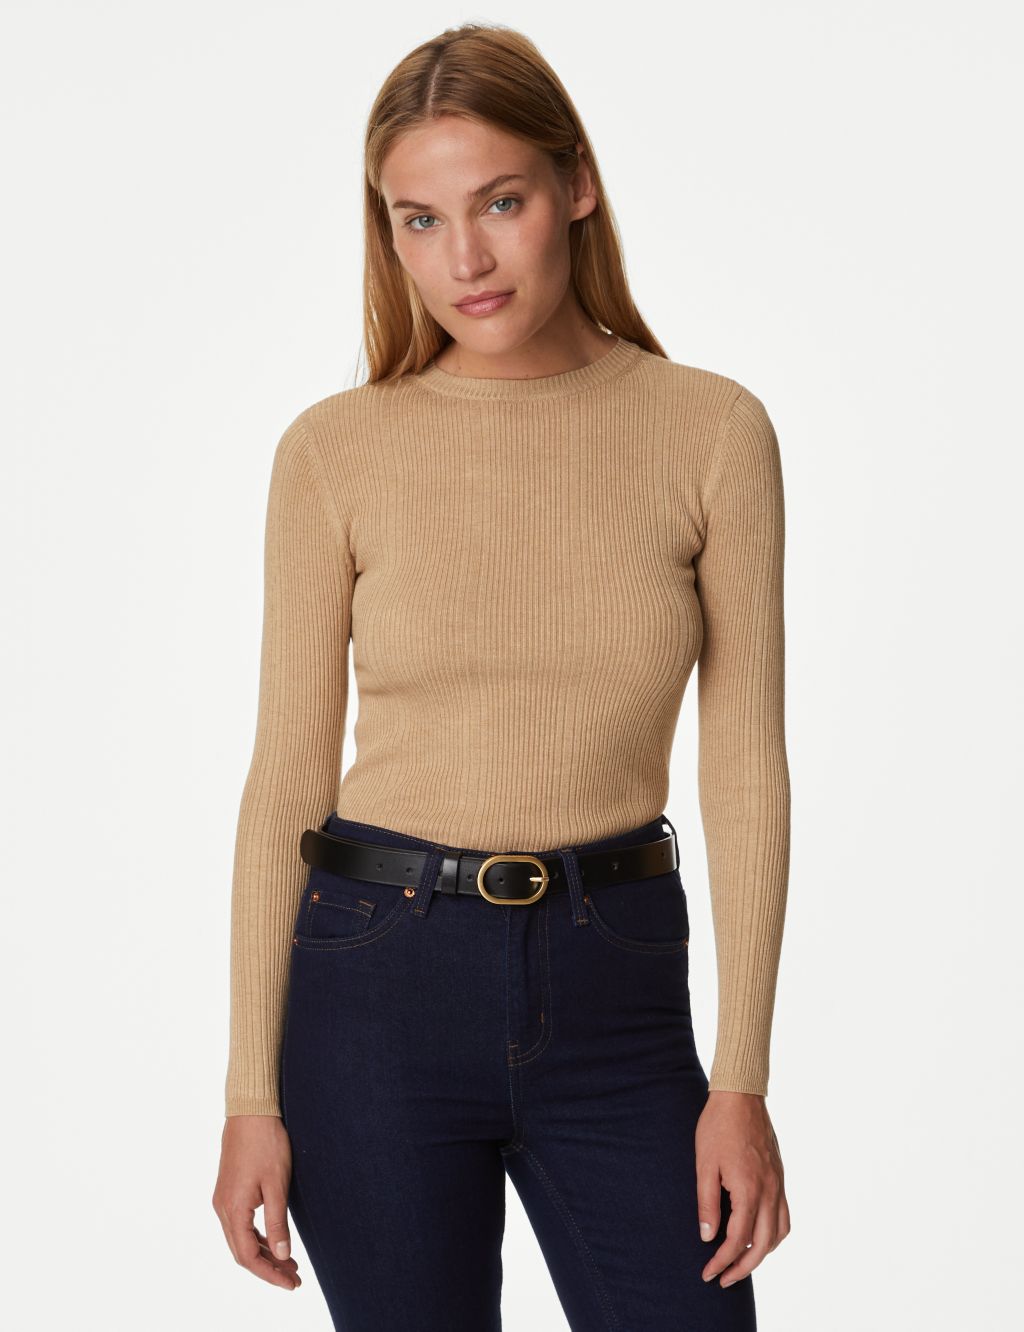 Ribbed Crew Neck Fitted Knitted Top image 3